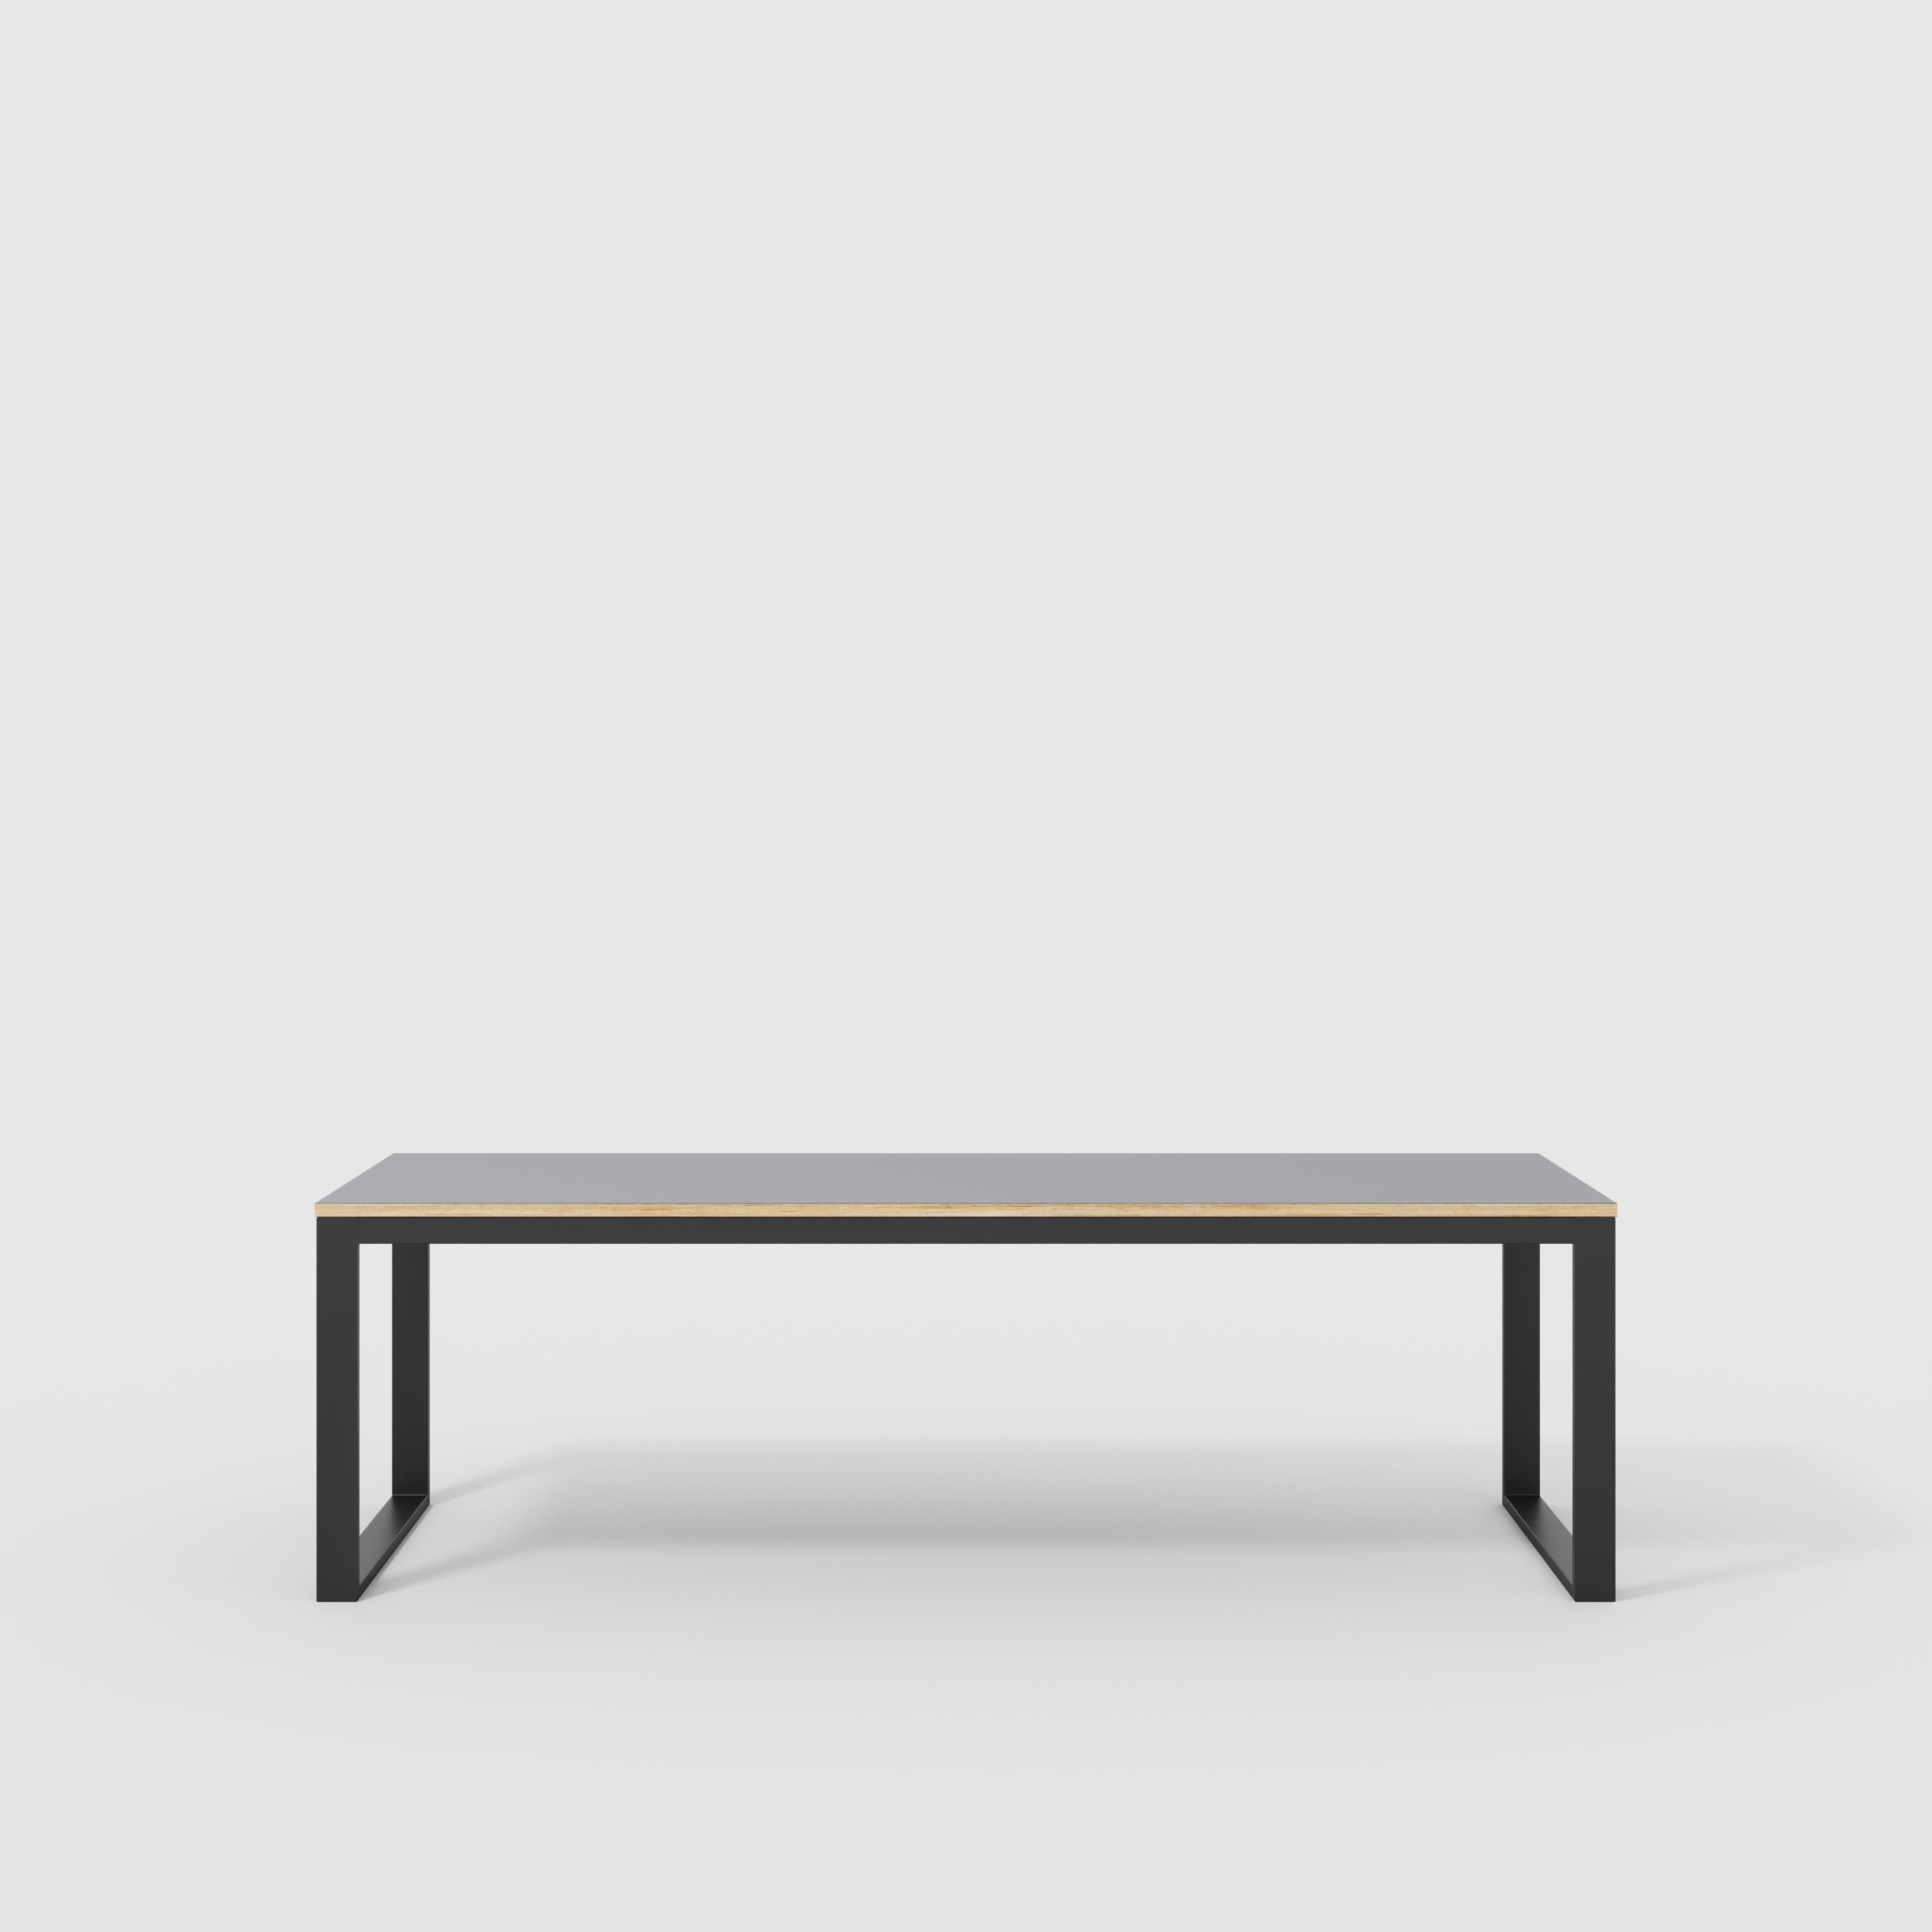 Table with Black Industrial Frame - Formica Tornado Grey- 2400(w) x 745(d) x 735(h)